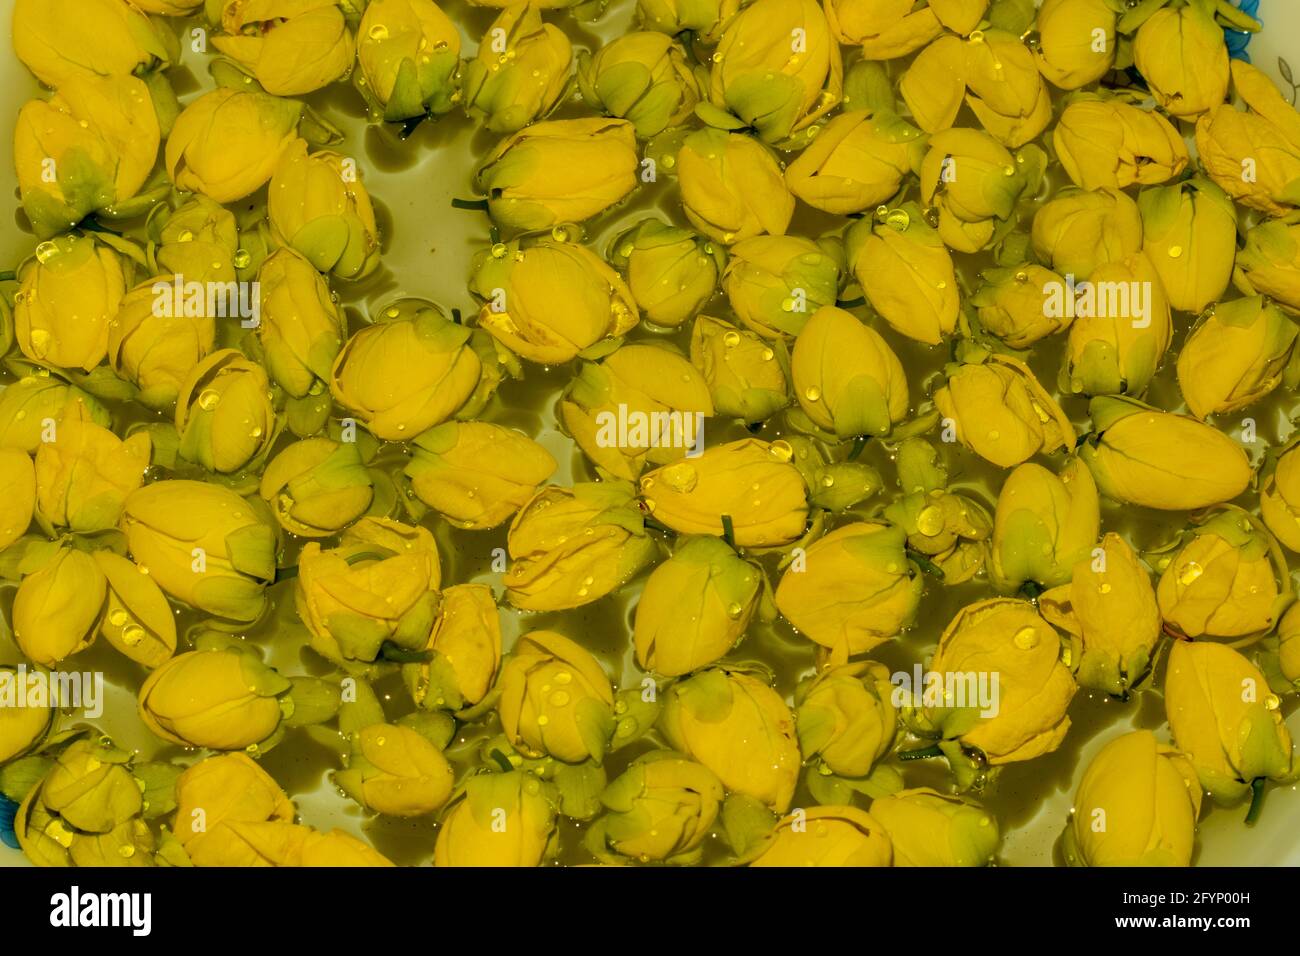 A bunch of Indian-laburnum or Golden shower yellow flower on clear water Stock Photo